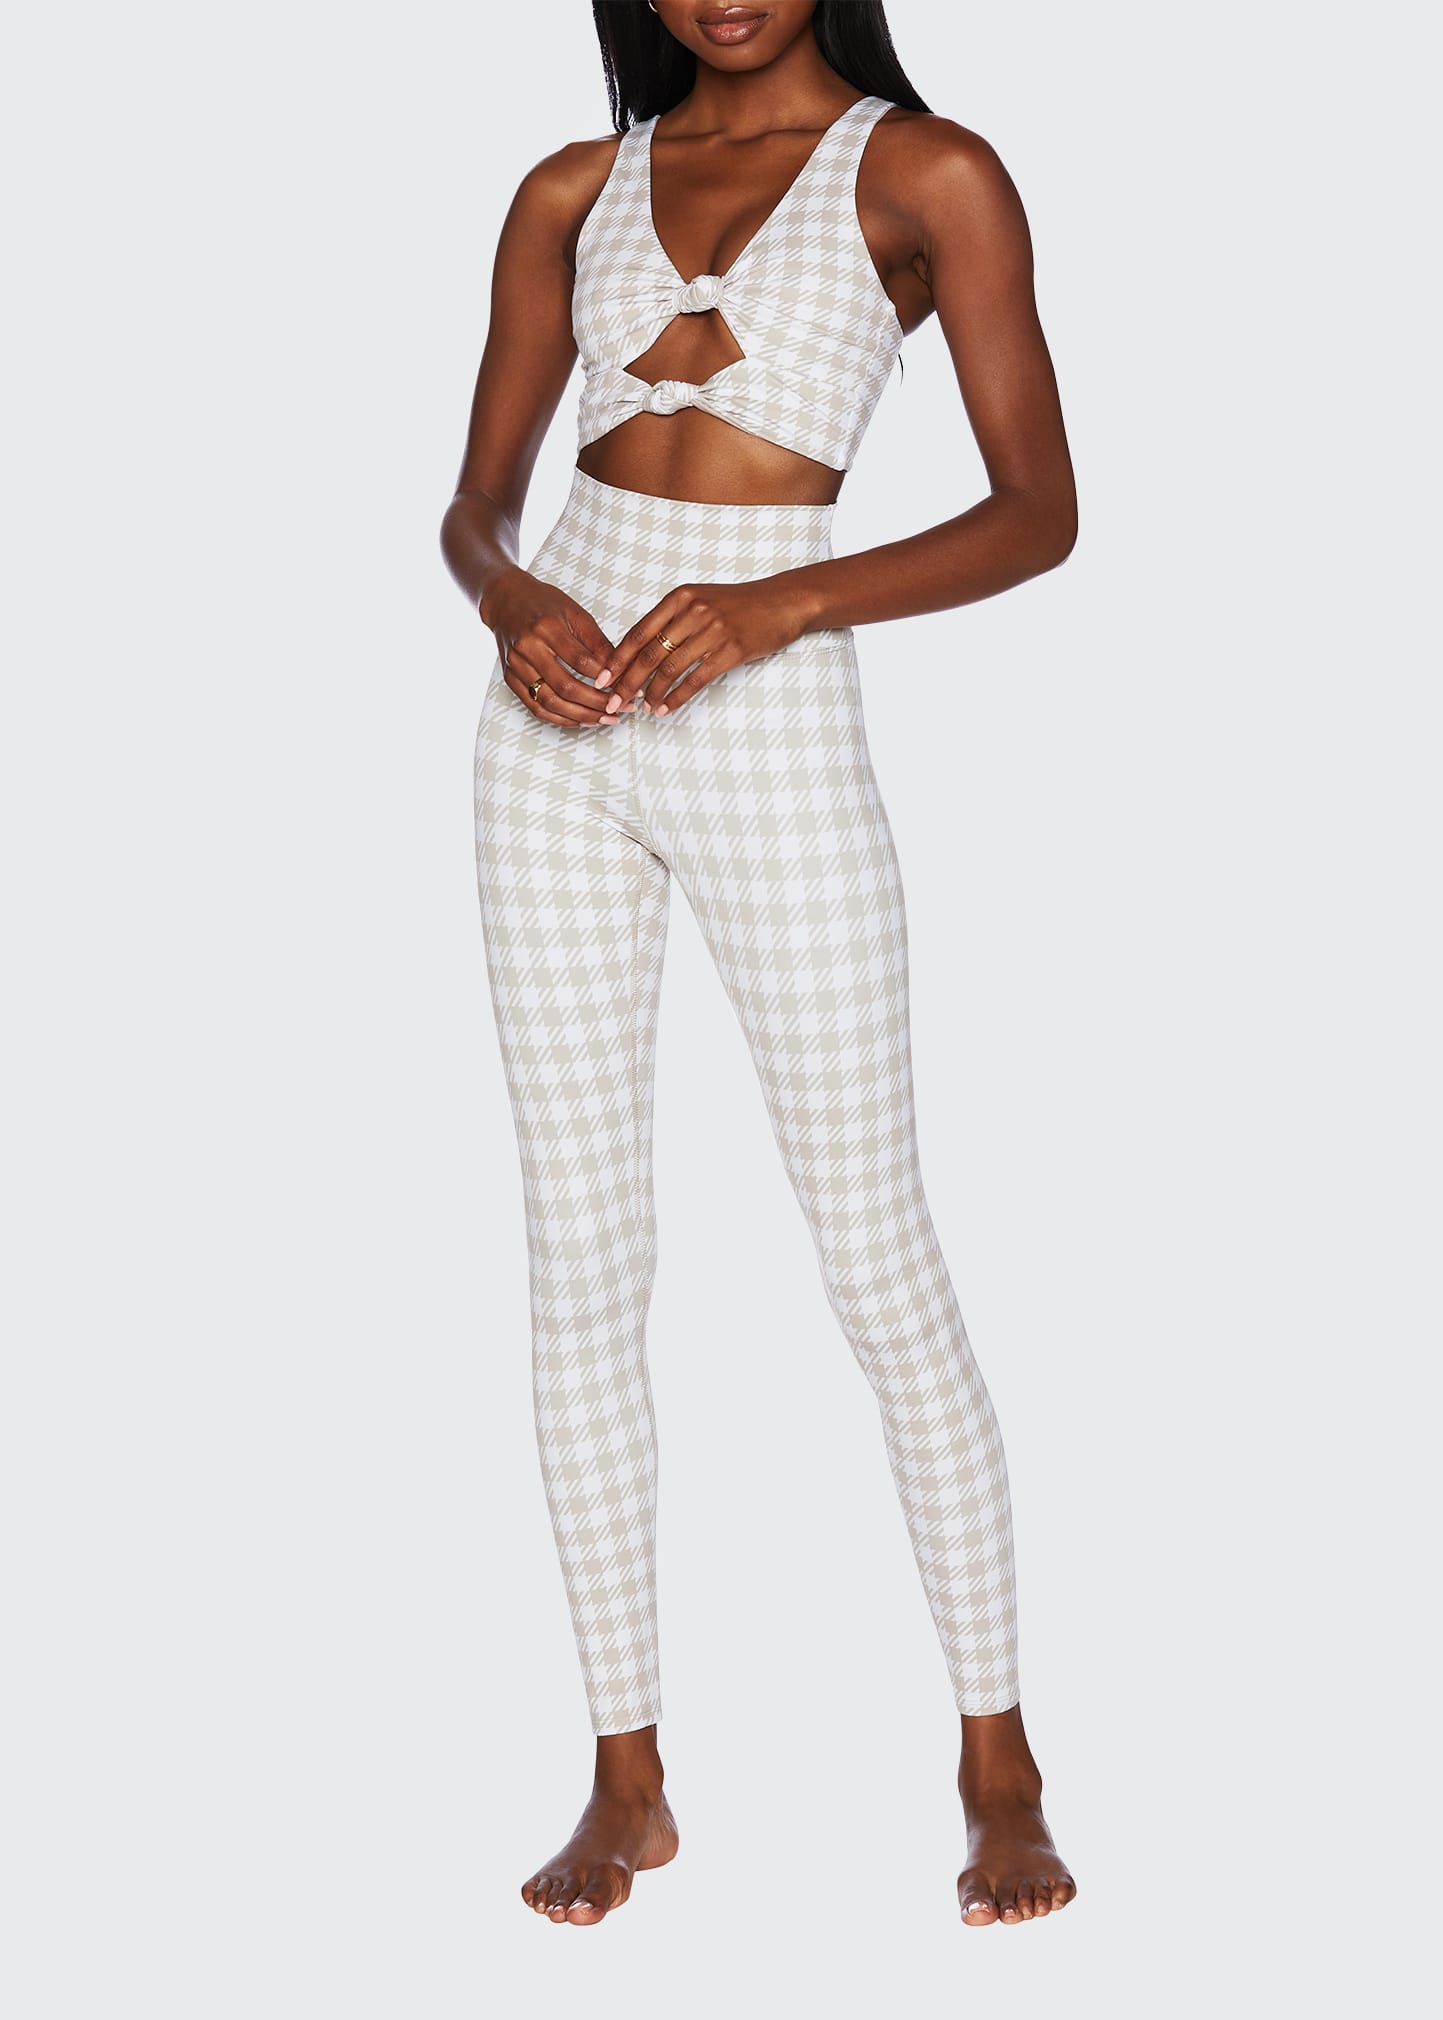 Beach Riot Piper High-waist Active Leggings In Taupe Houndstooth